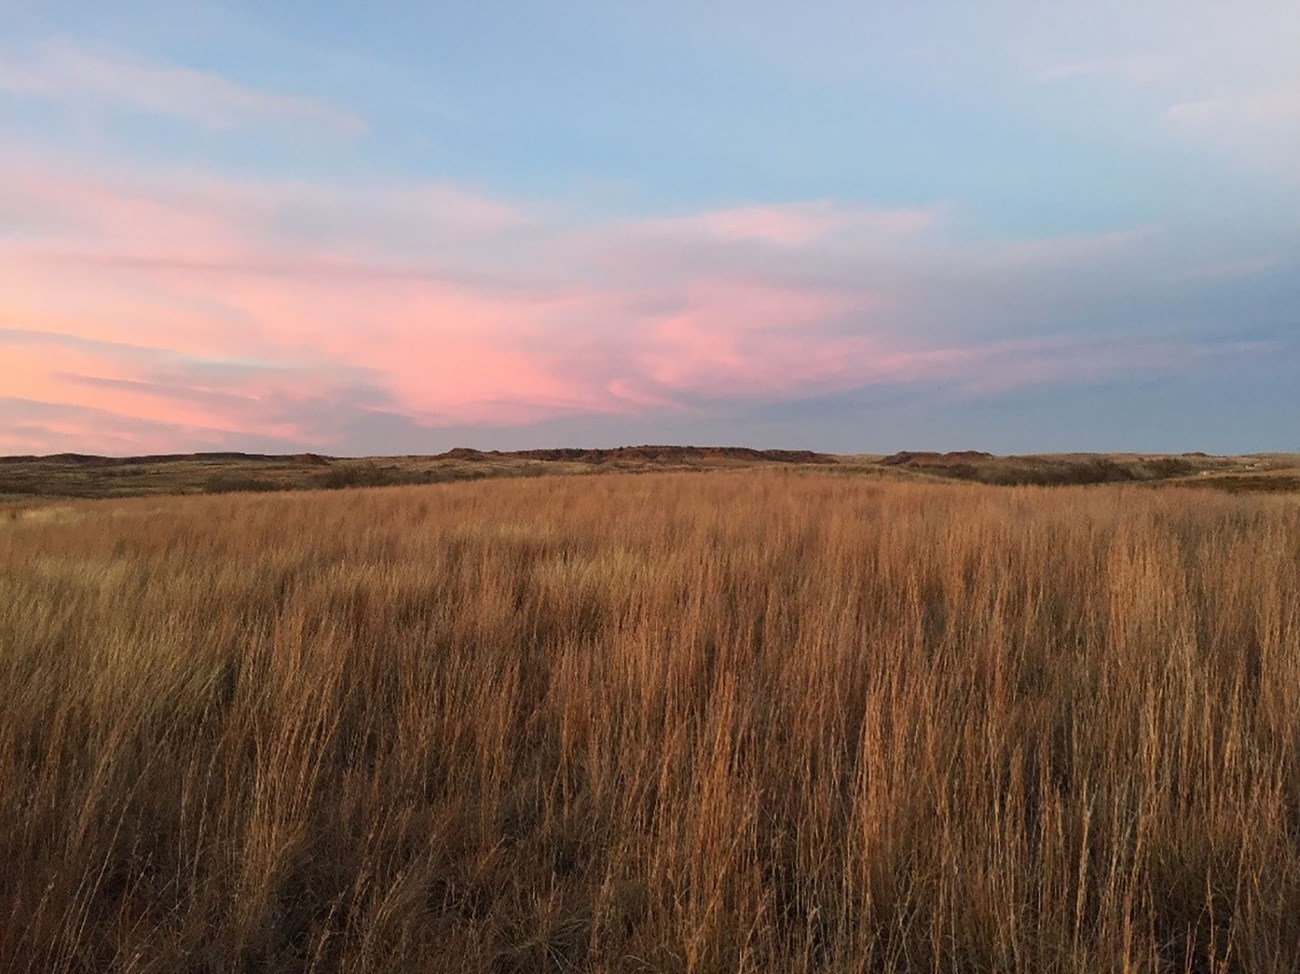 Field of tall grass with pink sky in the distance.